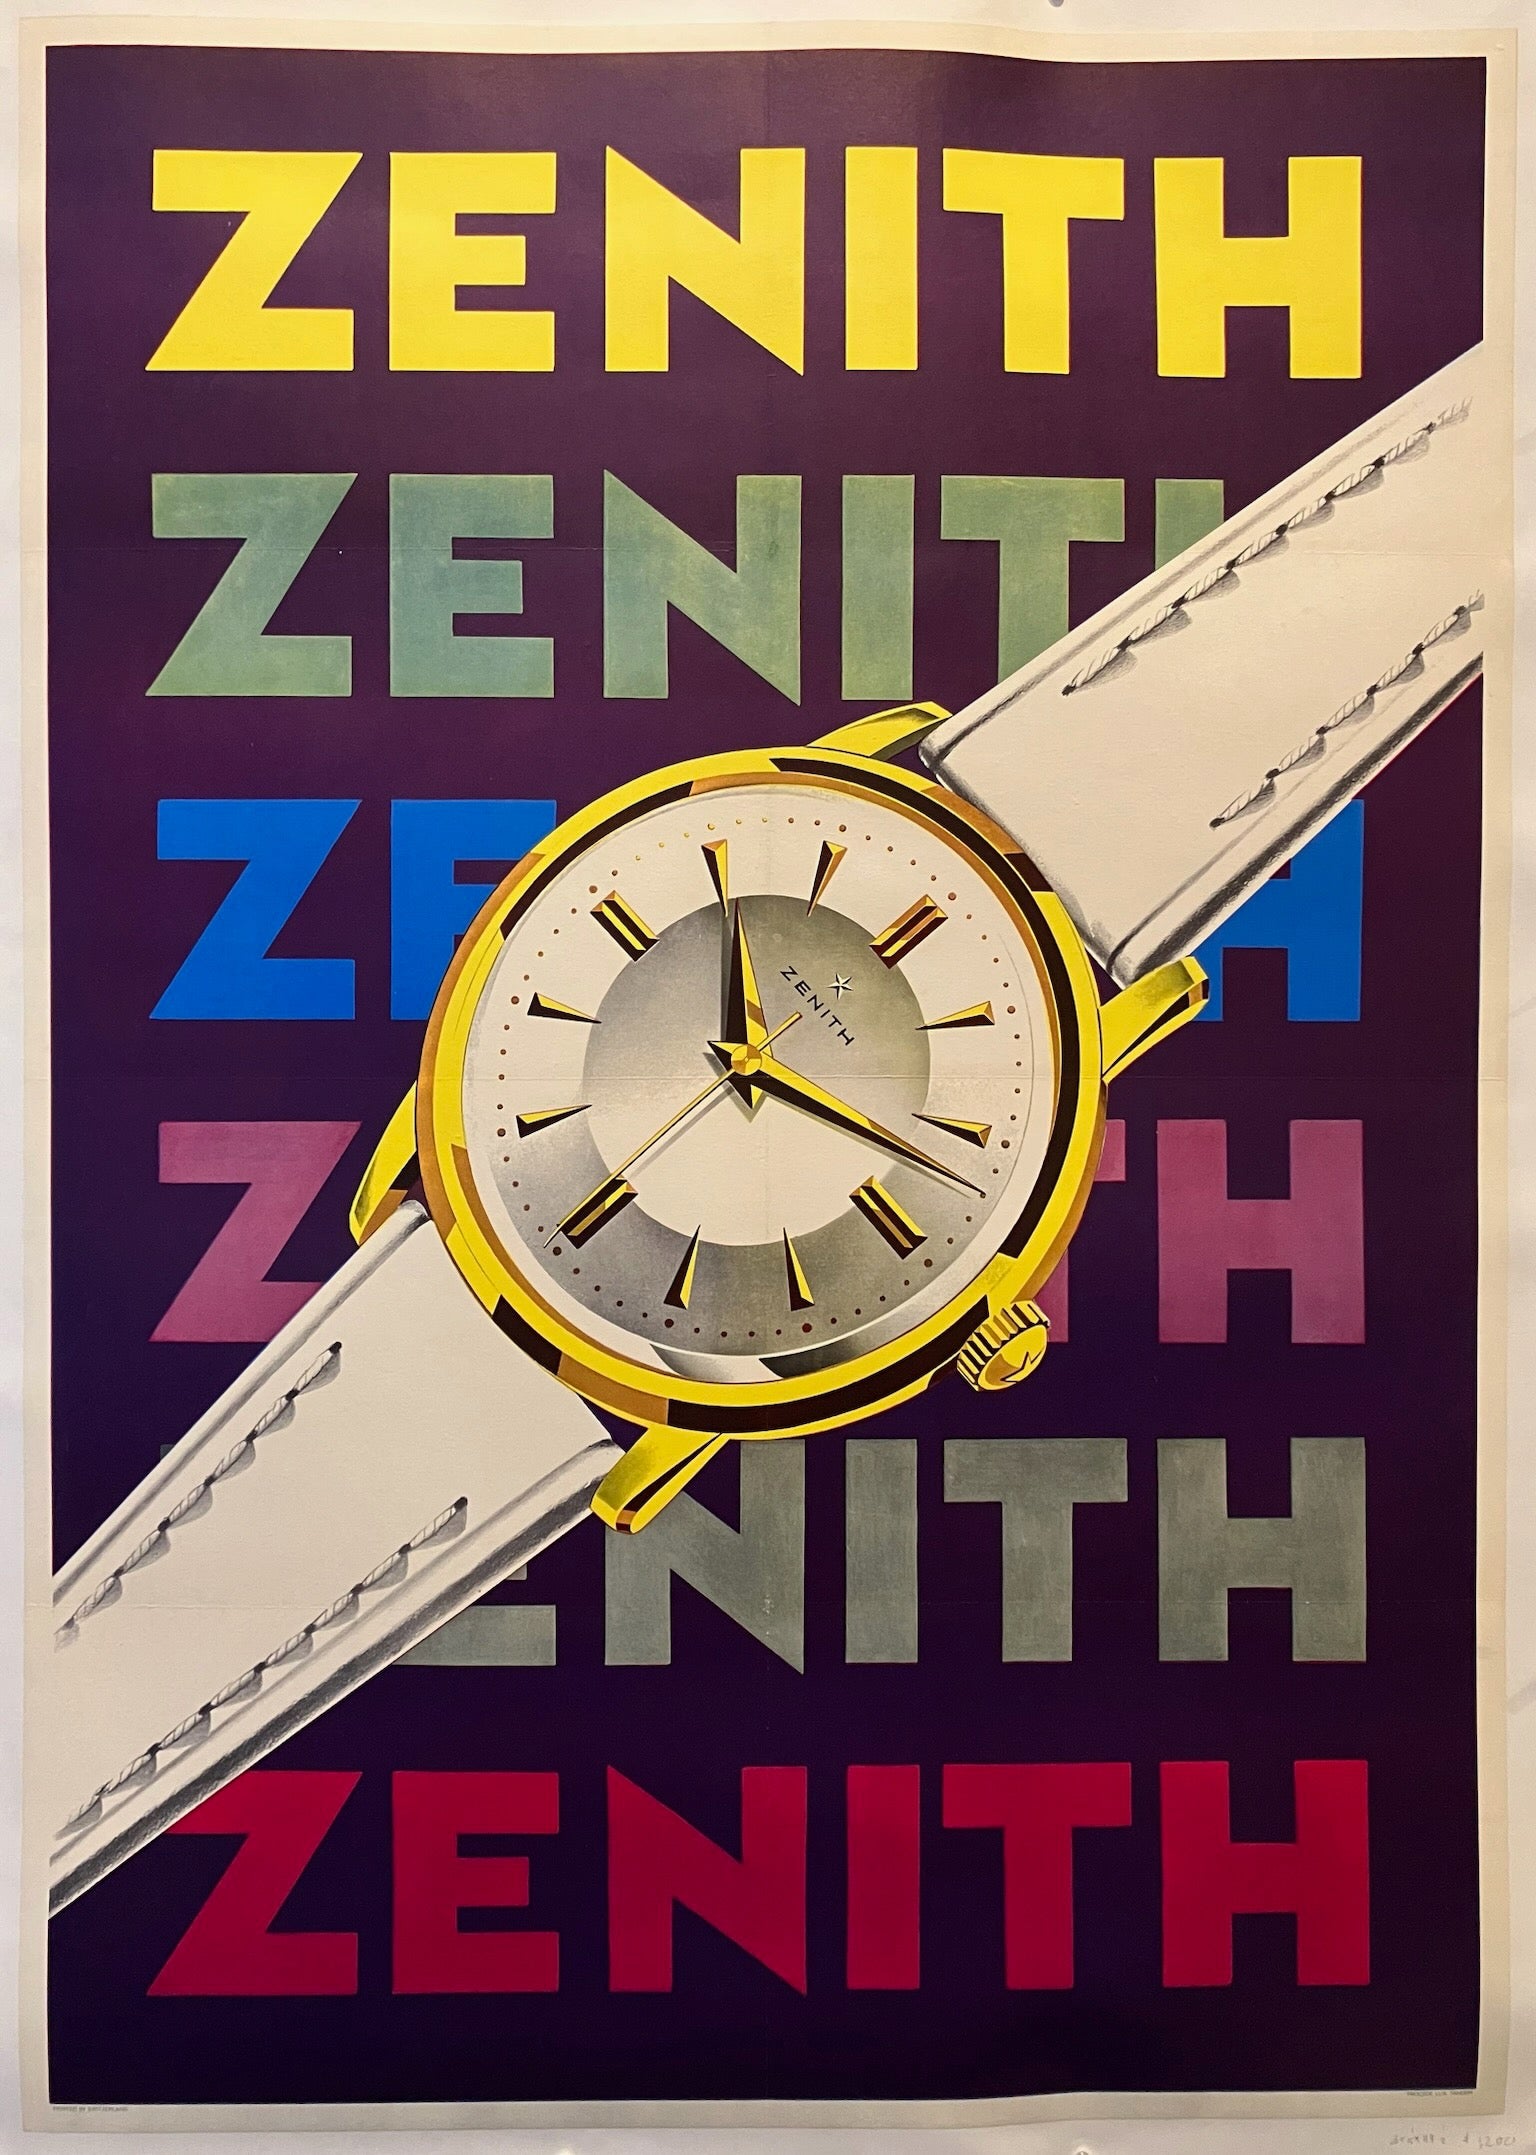 35x49.5 Zenith watch advertising poster featuring an oversized watch face across repeating text